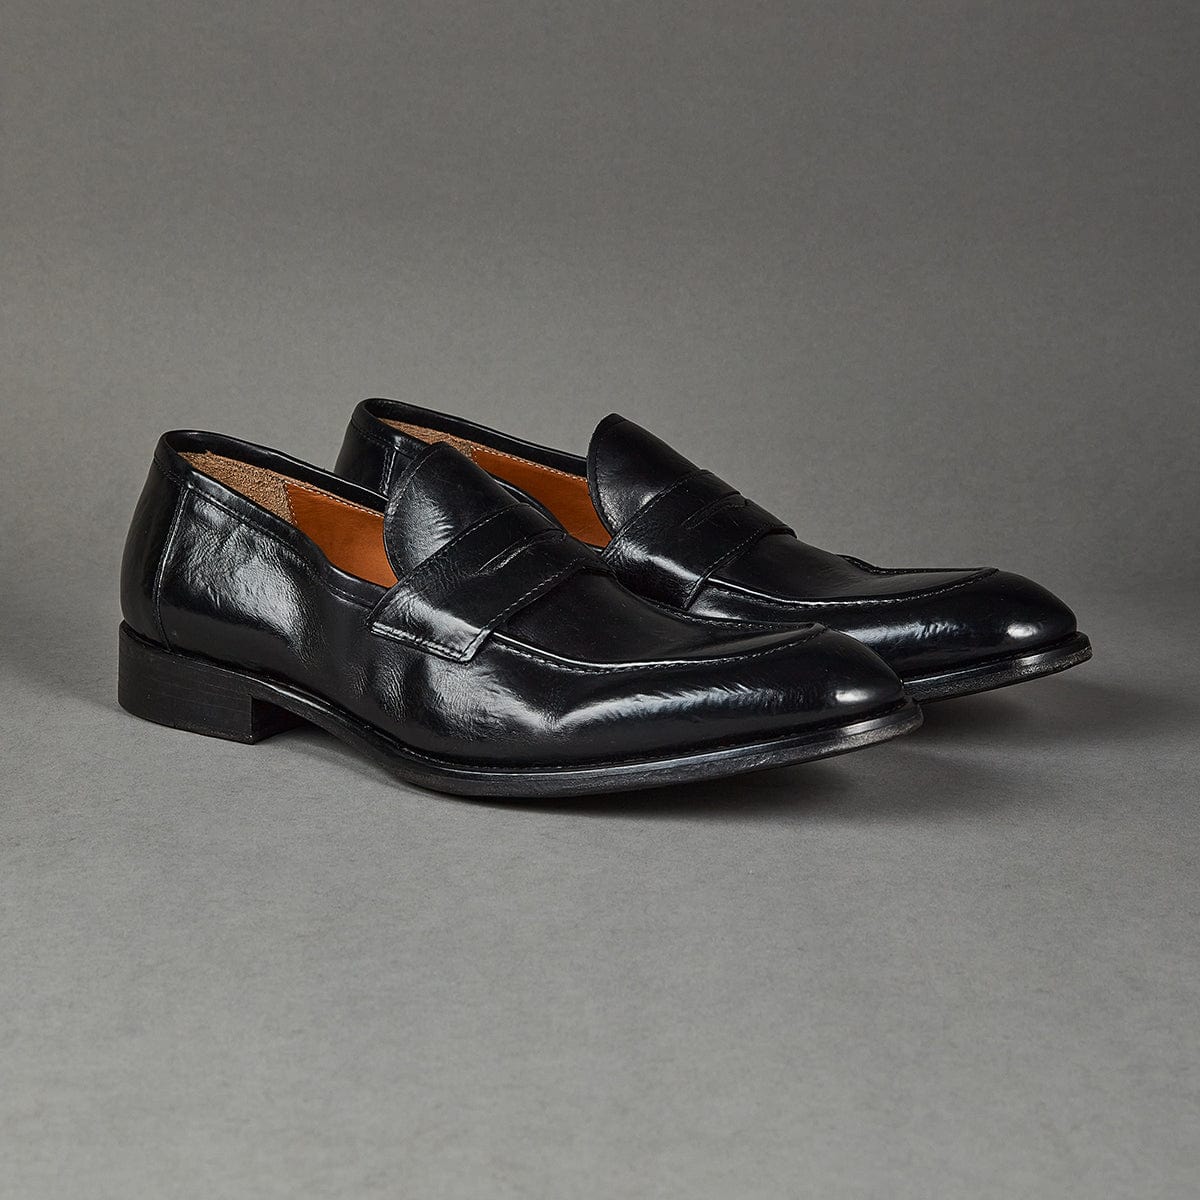 Conflict For Interest Loafer Conflict Piero black